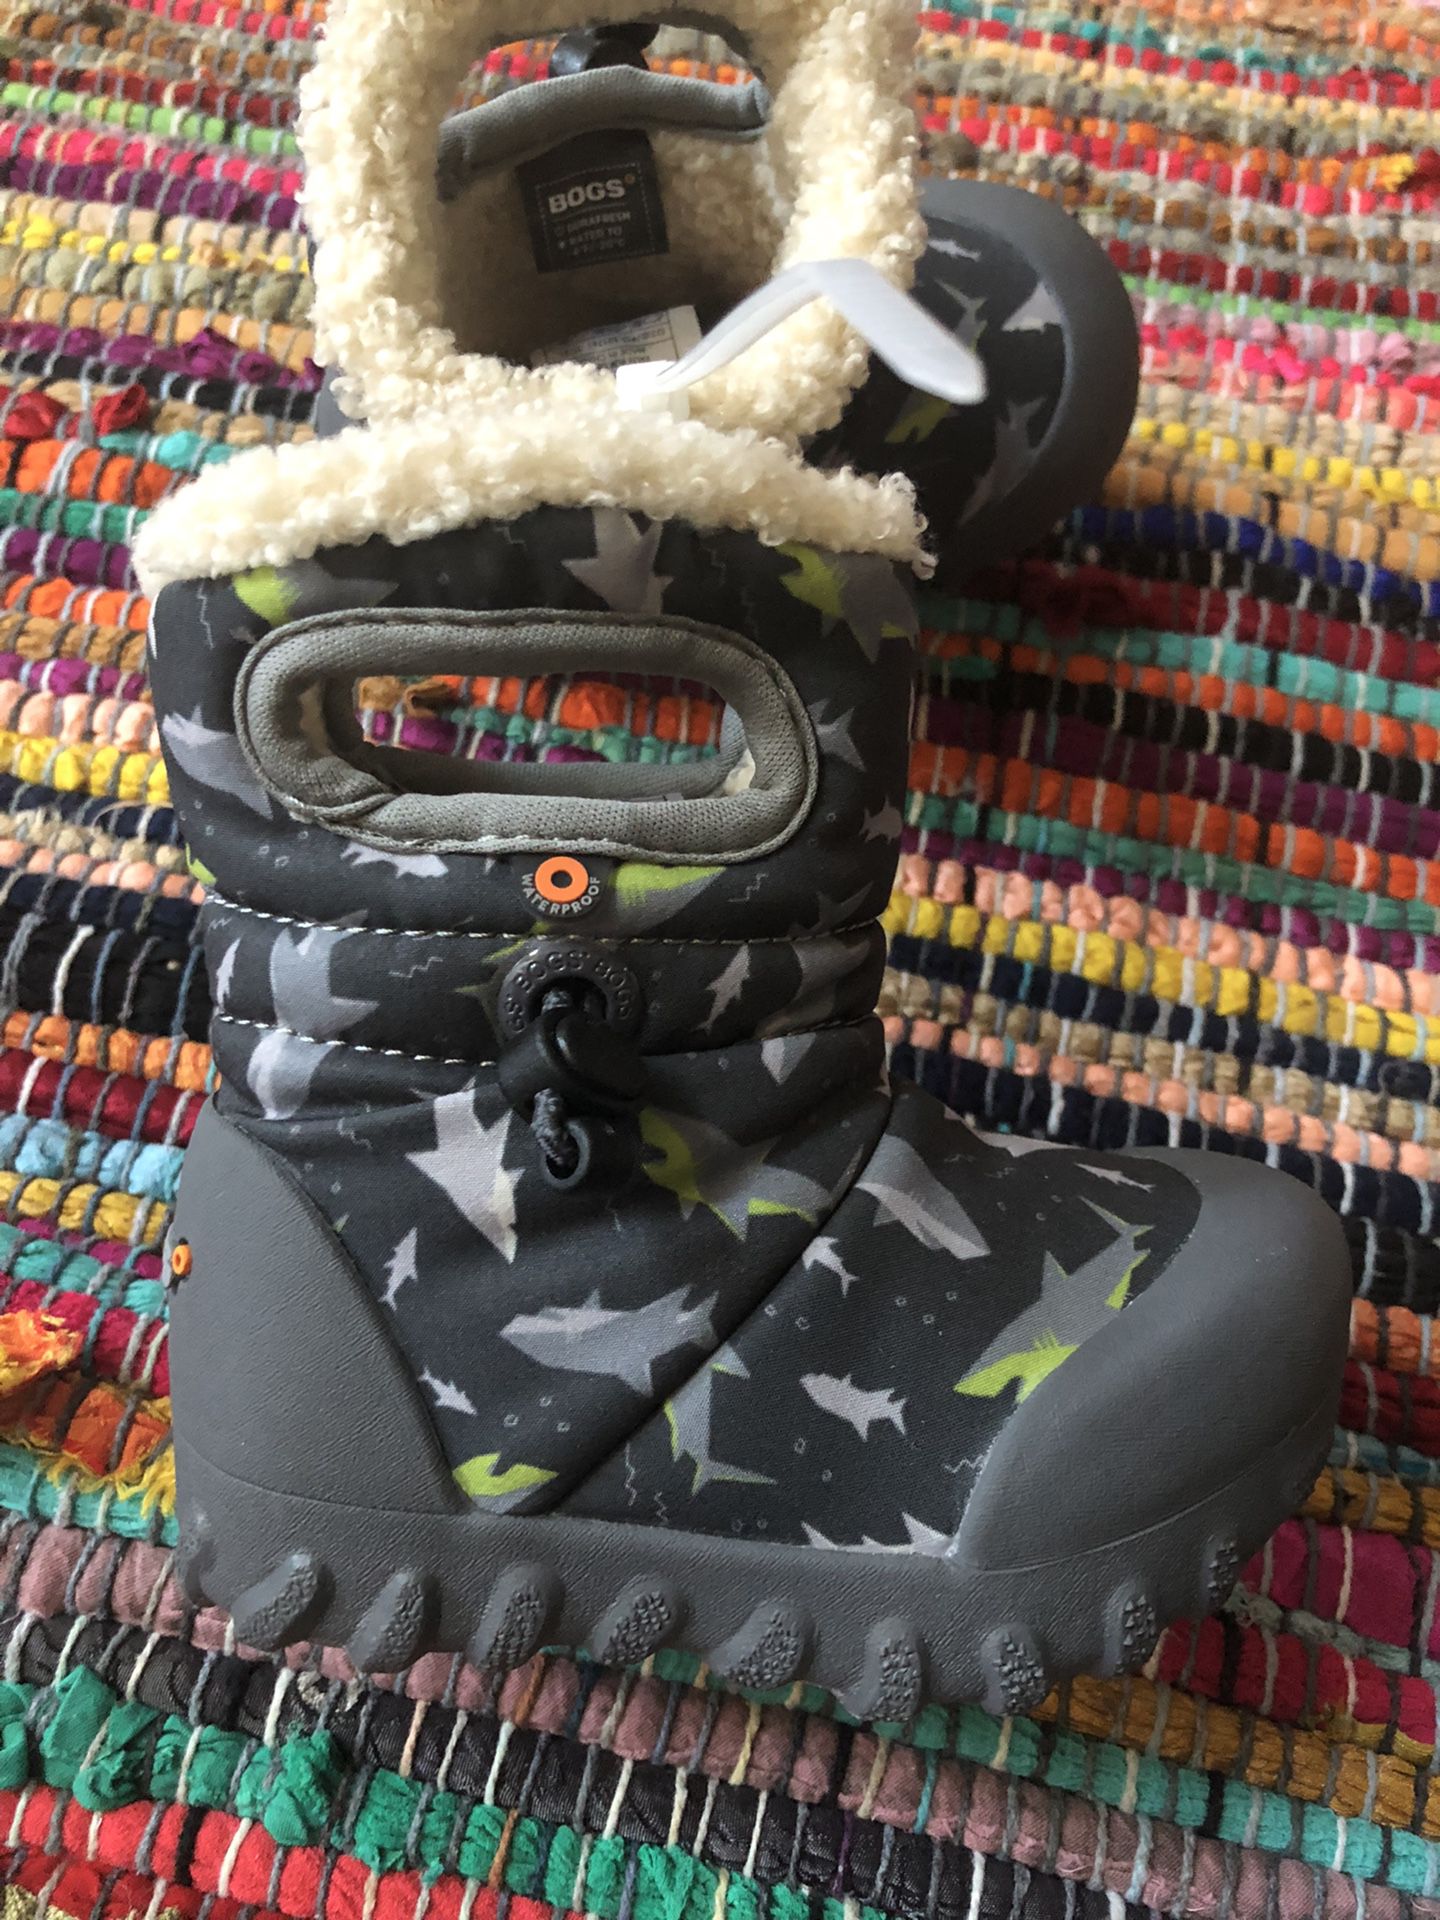 Bogs SHARKS  Baby Snow Boots Size 5 infant/21 Euro